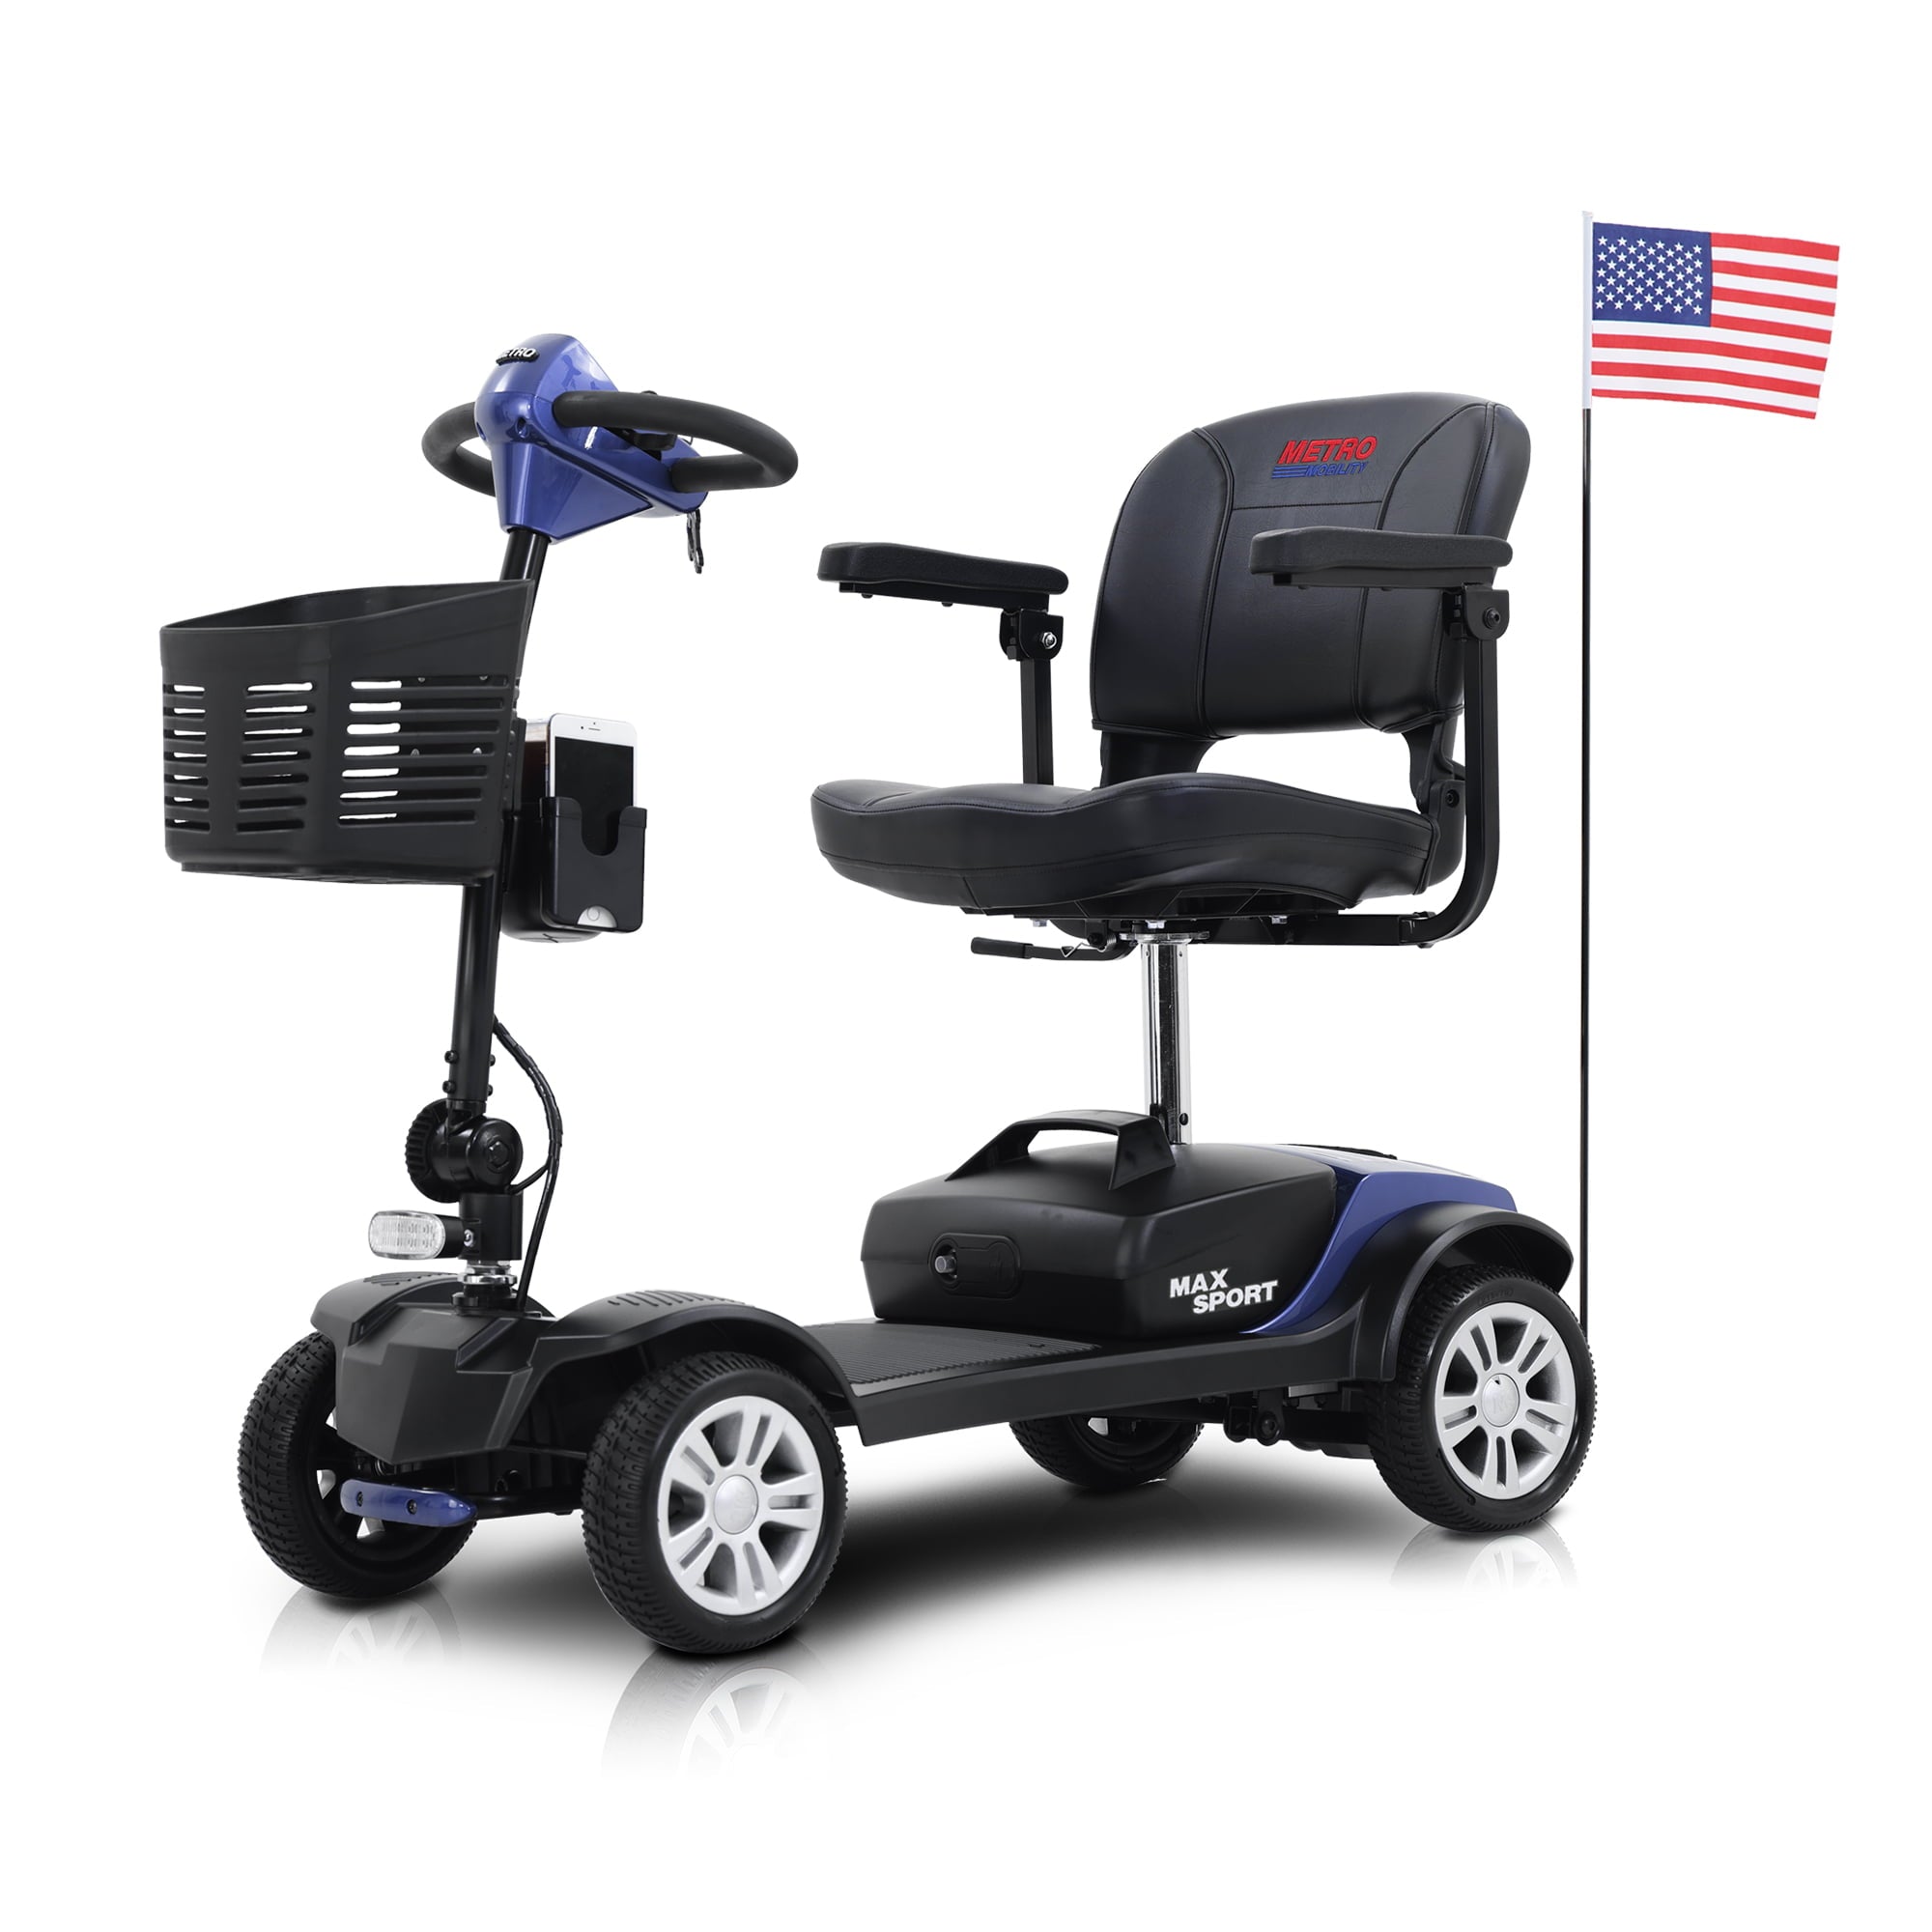 Suzicca SPORT BLUE 4 Wheels Outdoor Compact Mobility Scooter with 2 in 1 Cup & Phone Holder